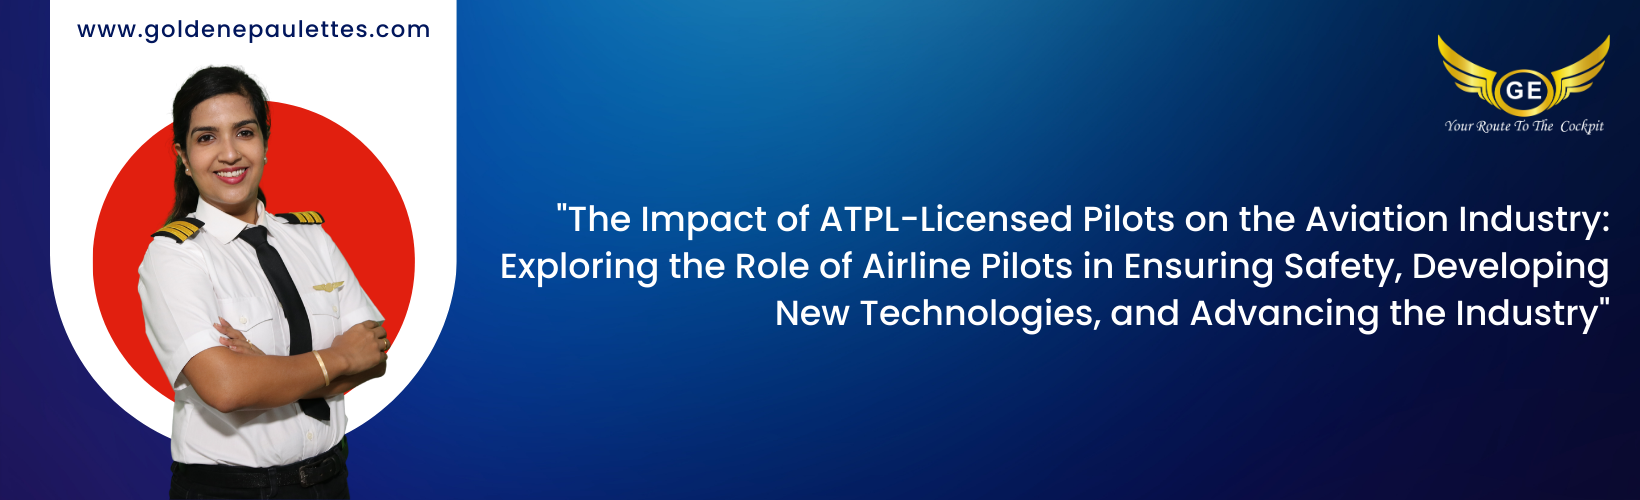 The Cost of Becoming an ATPL-Licensed Pilot